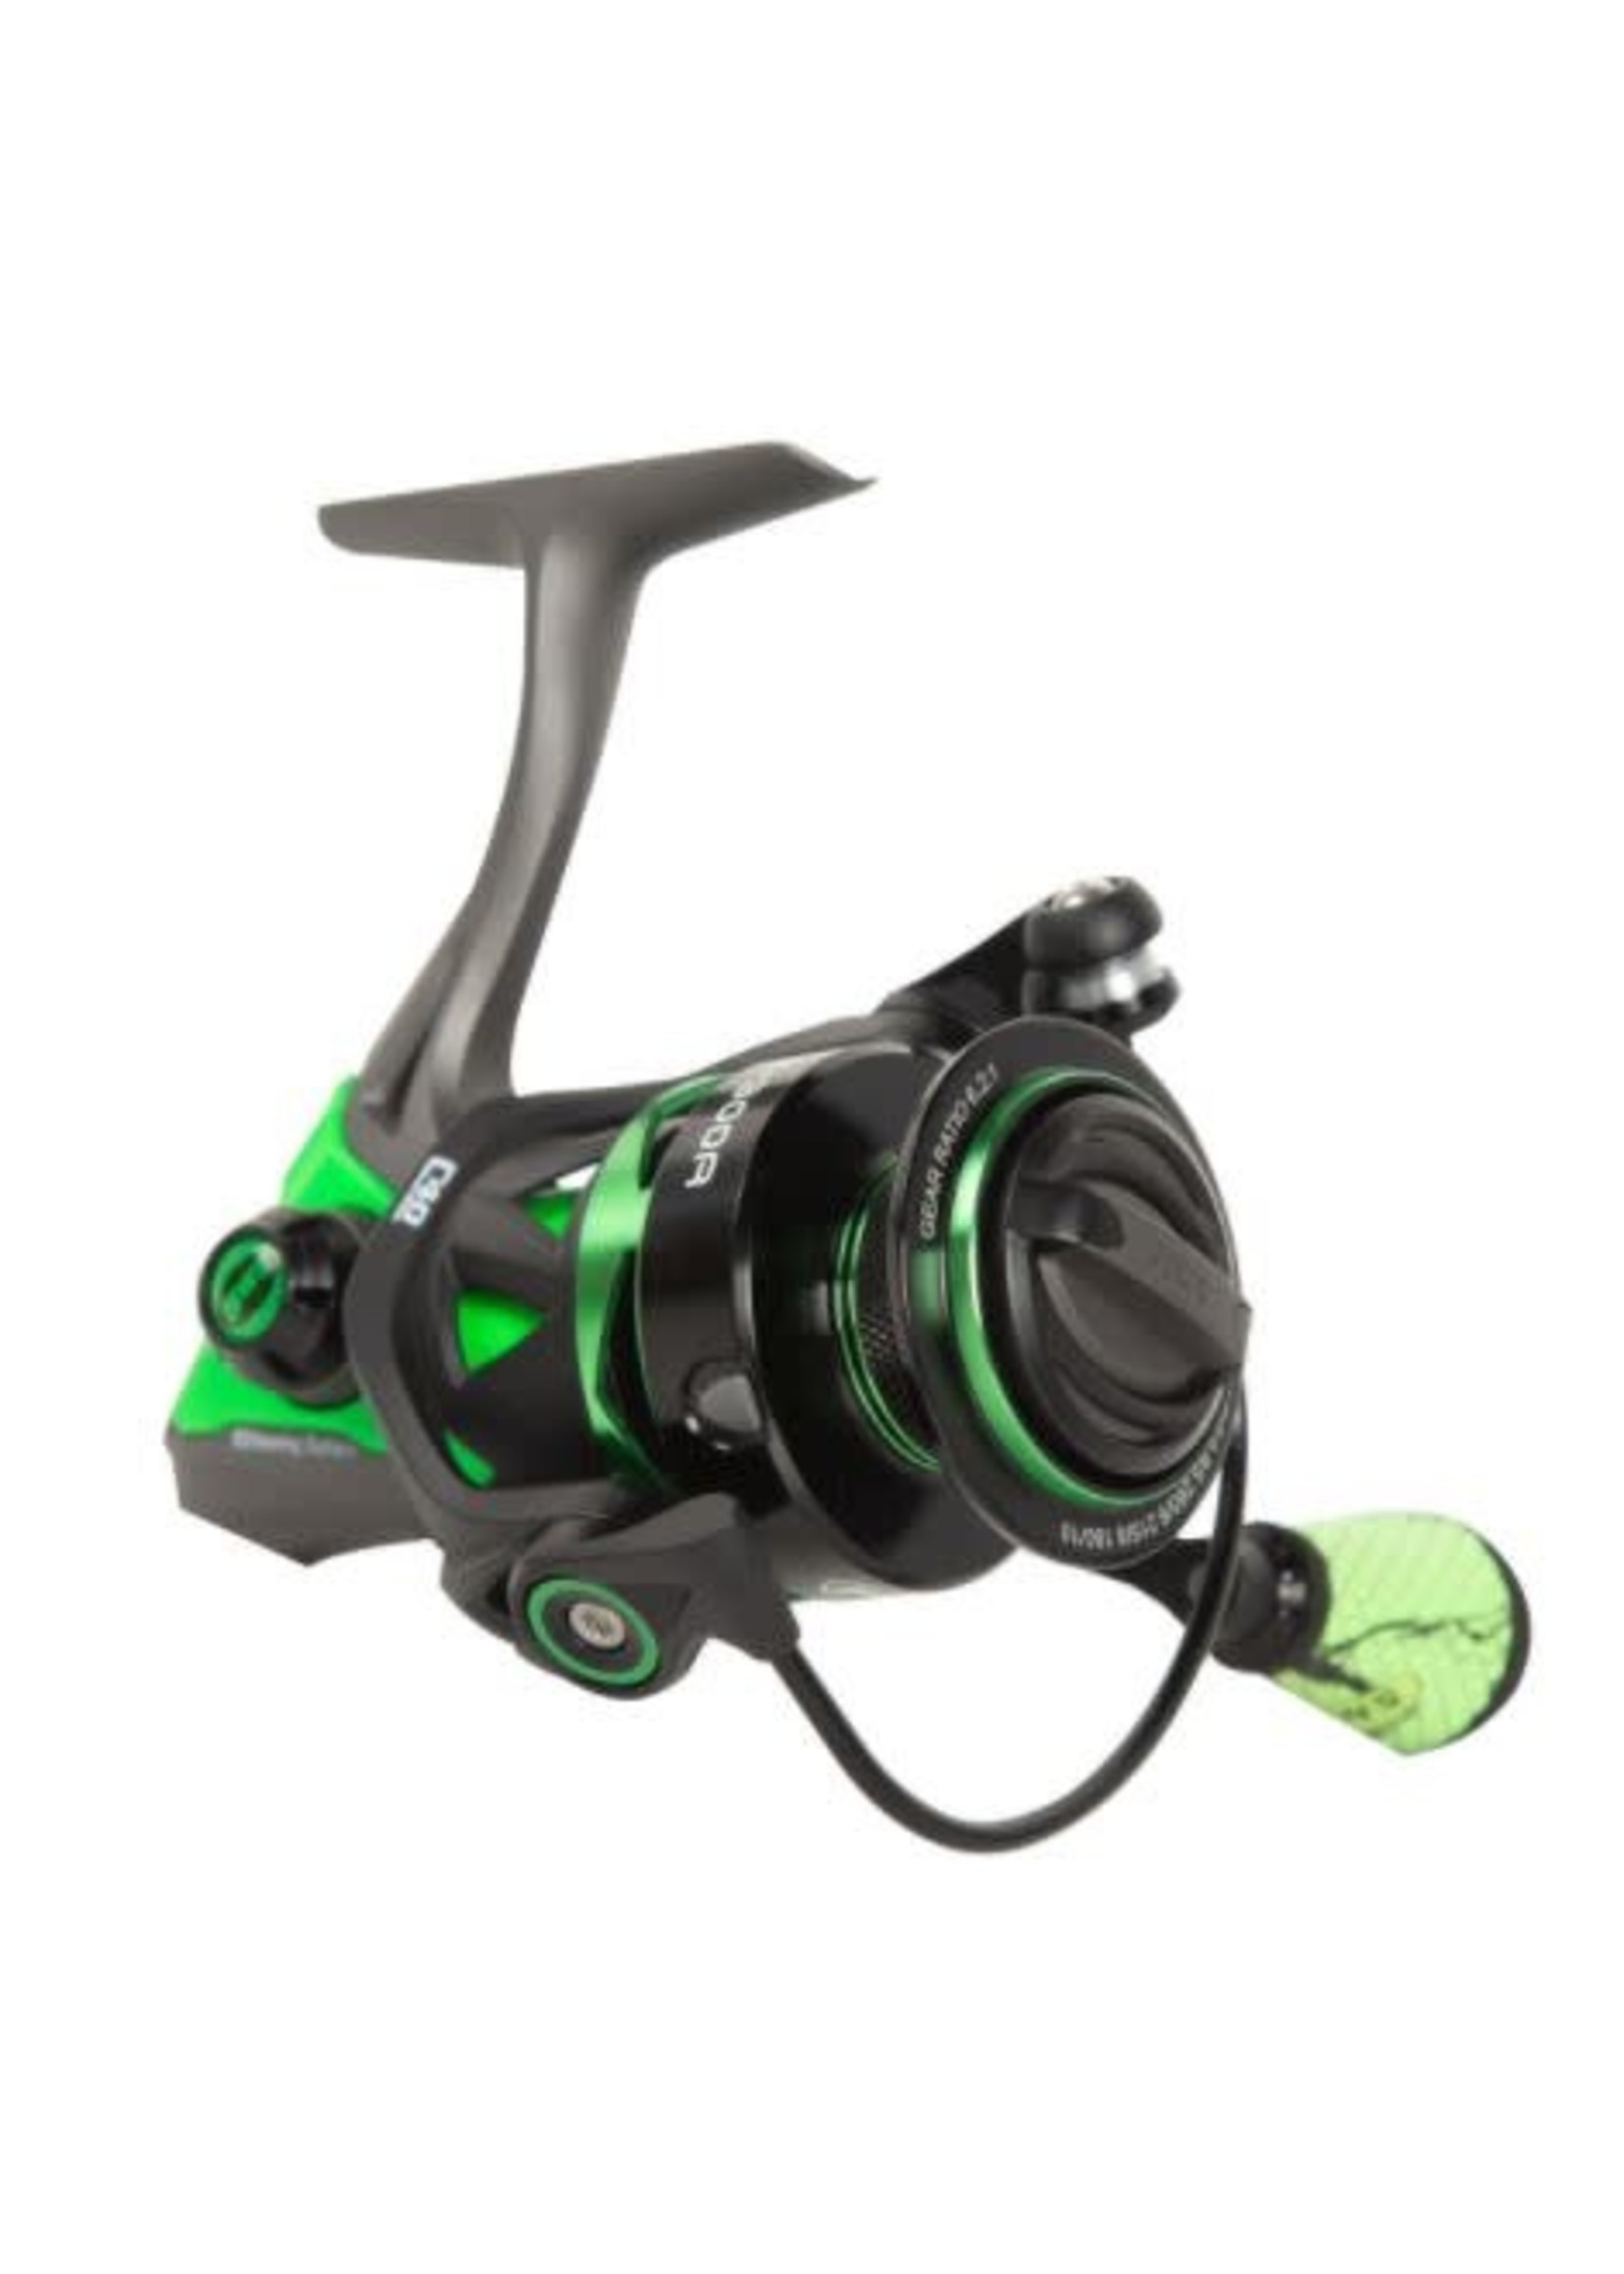 Lew's MS400 Mach Speed Spinning Reel – Fishbrain, 47% OFF